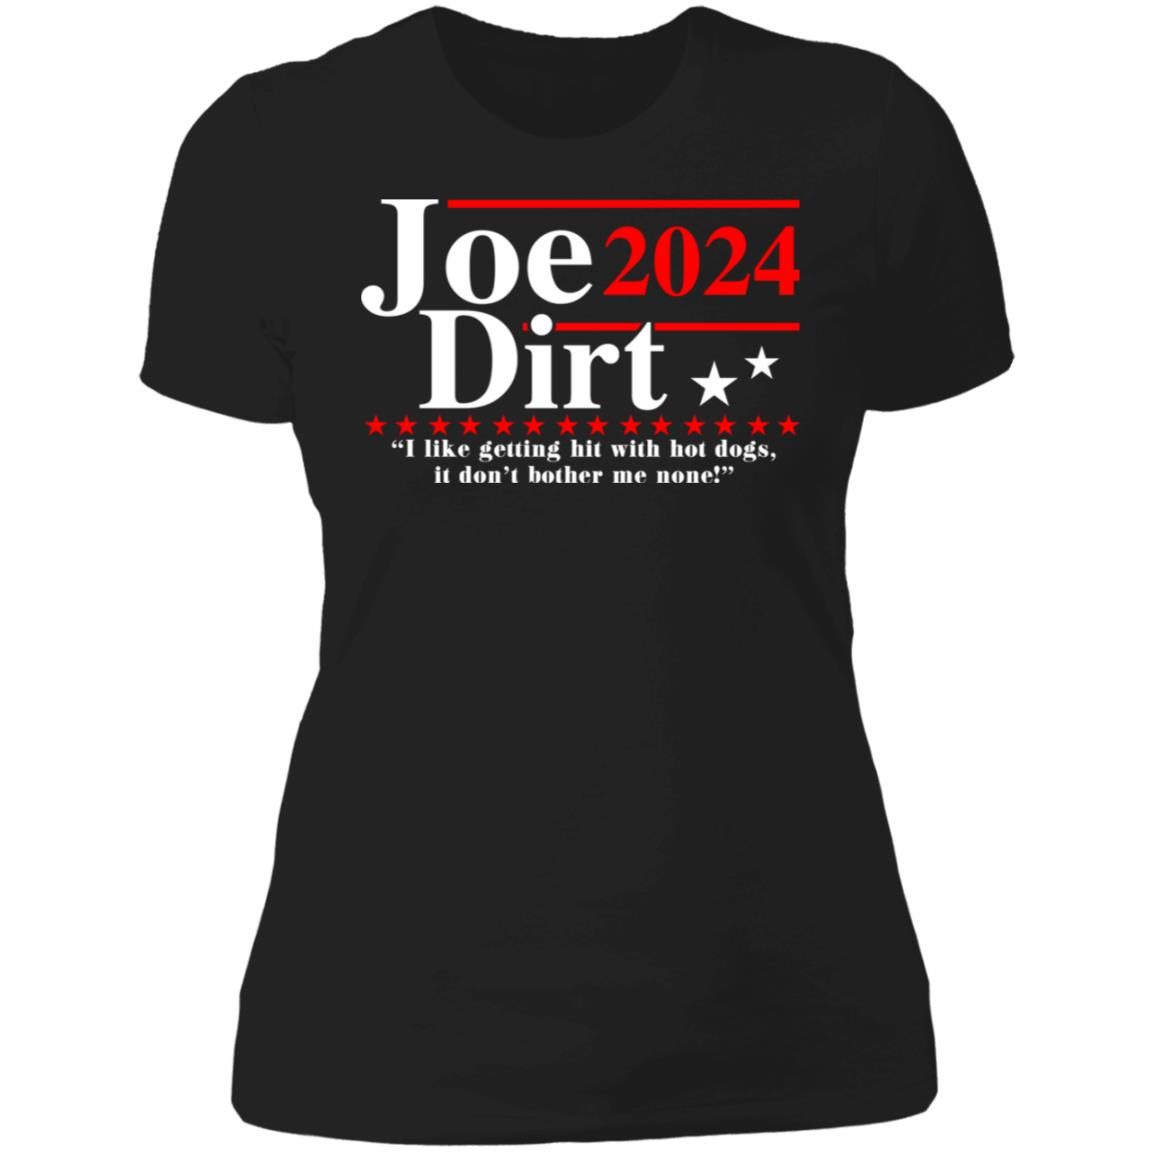 Joe Dirt 2024 i like getting hit with hot dogs it don’t bother me none